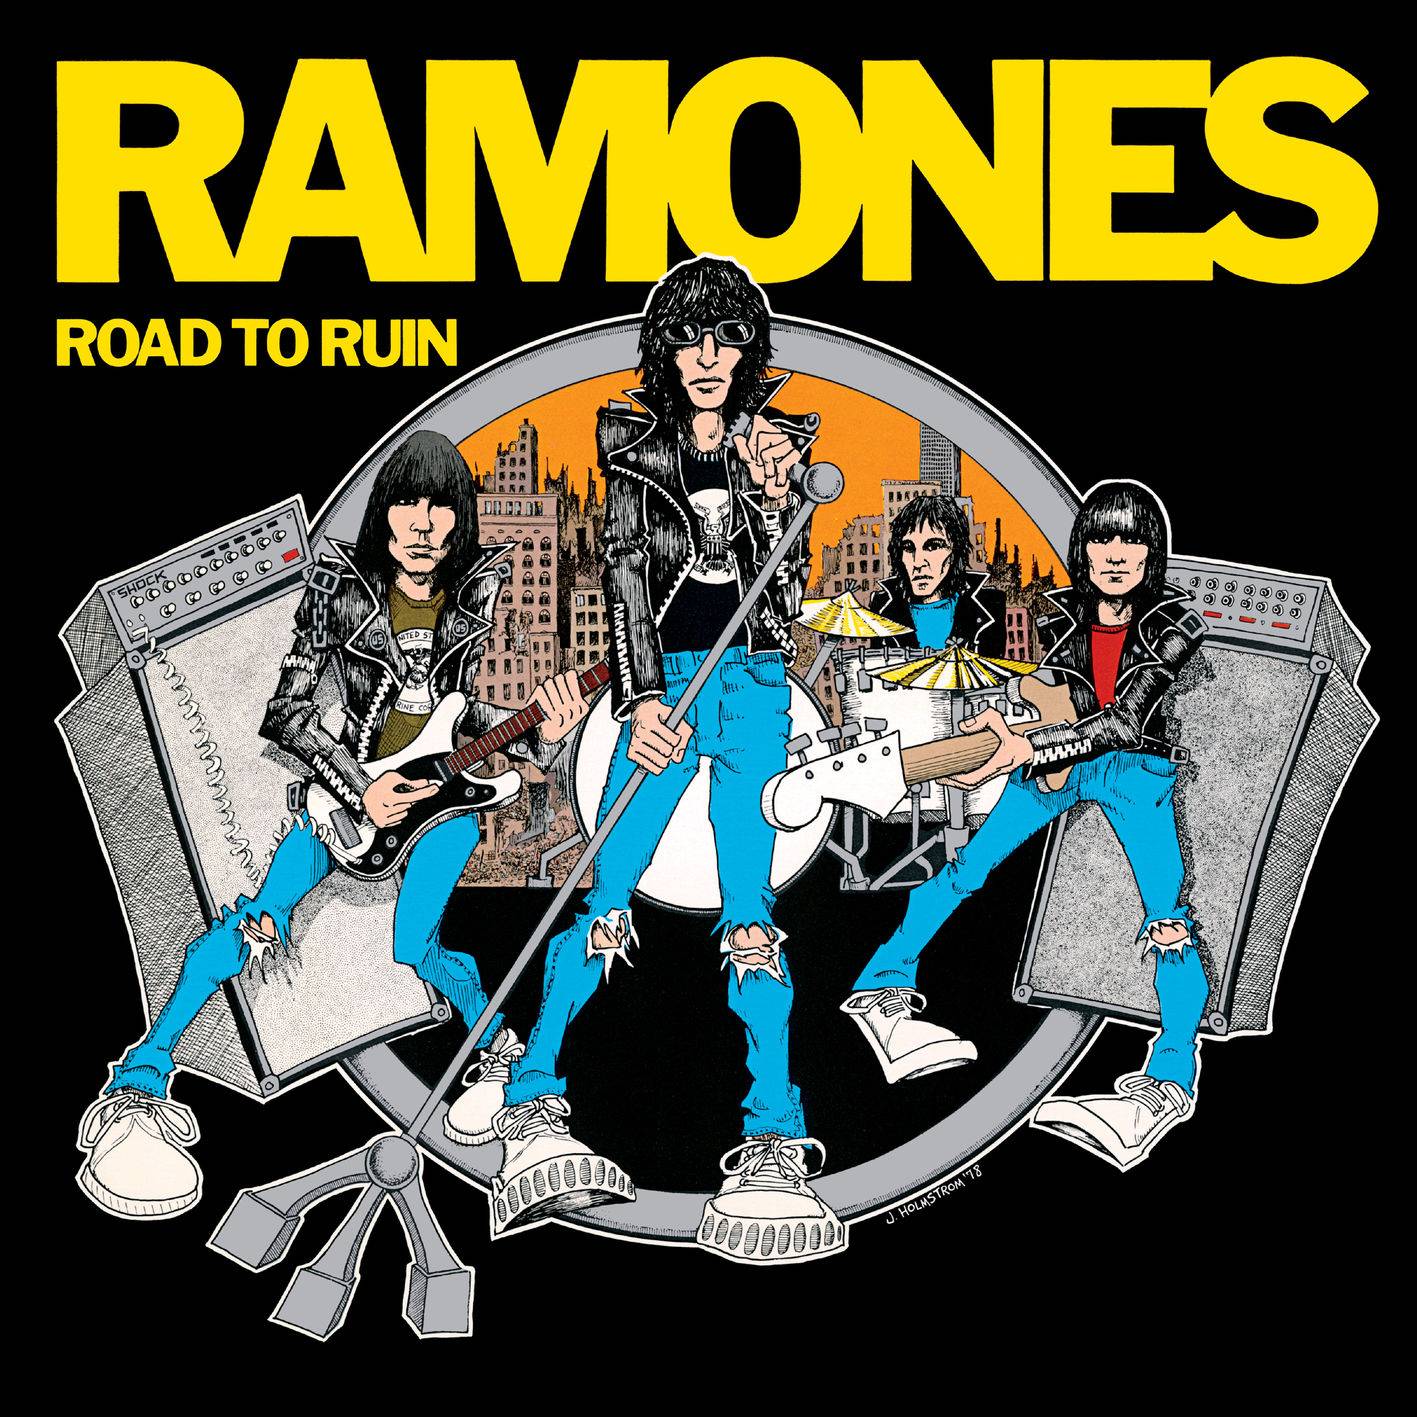 Ramones - Road To Ruin (40th Anniversary Deluxe Edition) (1978/2018) [FLAC 24bit/96kHz]